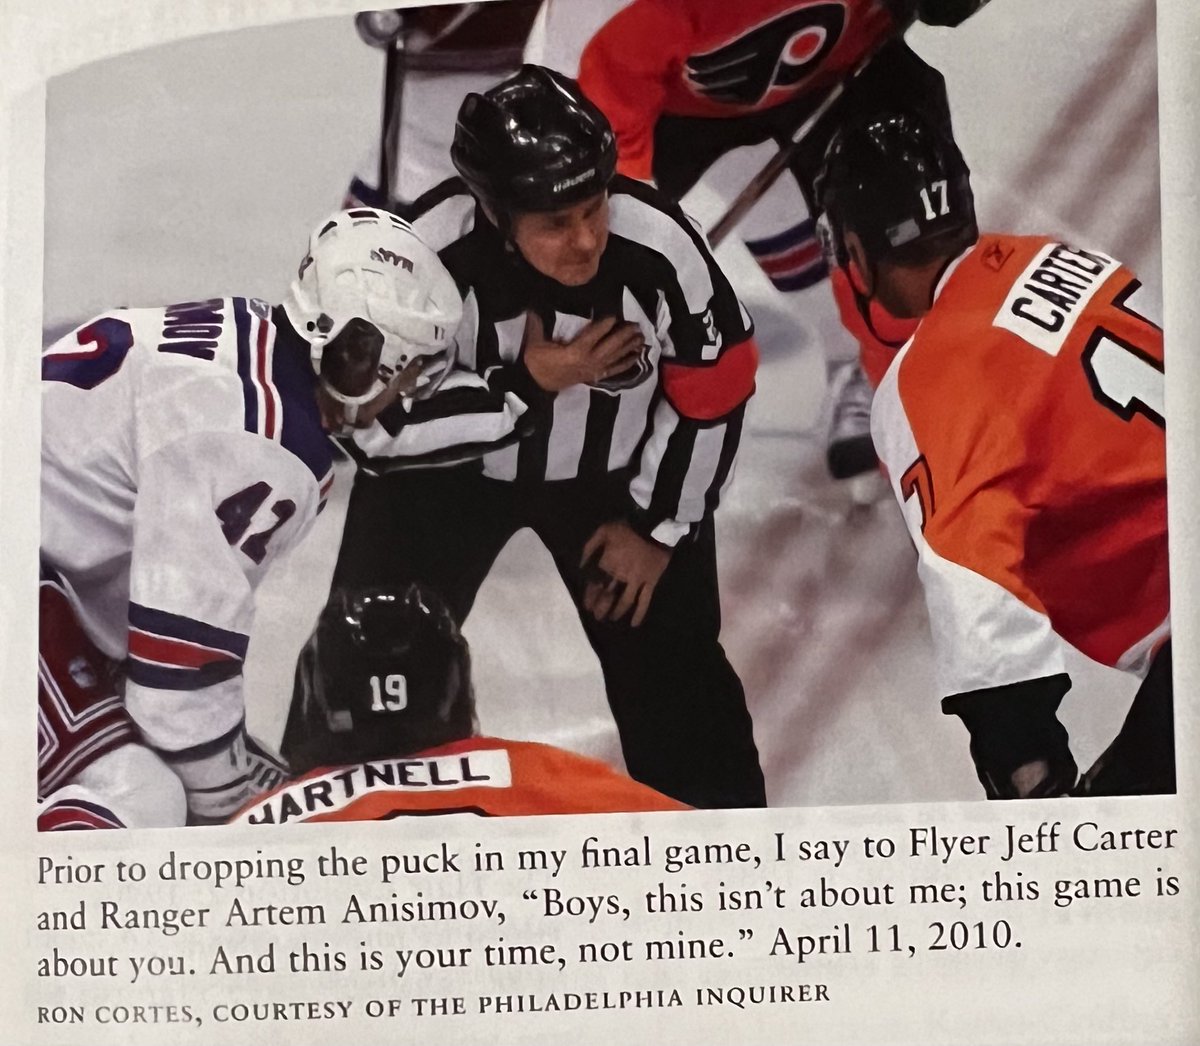 Opening face-off 14 years ago today. Flyers defeat Rangers in shootout to gain final Eastern Conference playoff spot. Tonight, both coaches from my final NHL game have switched teams.